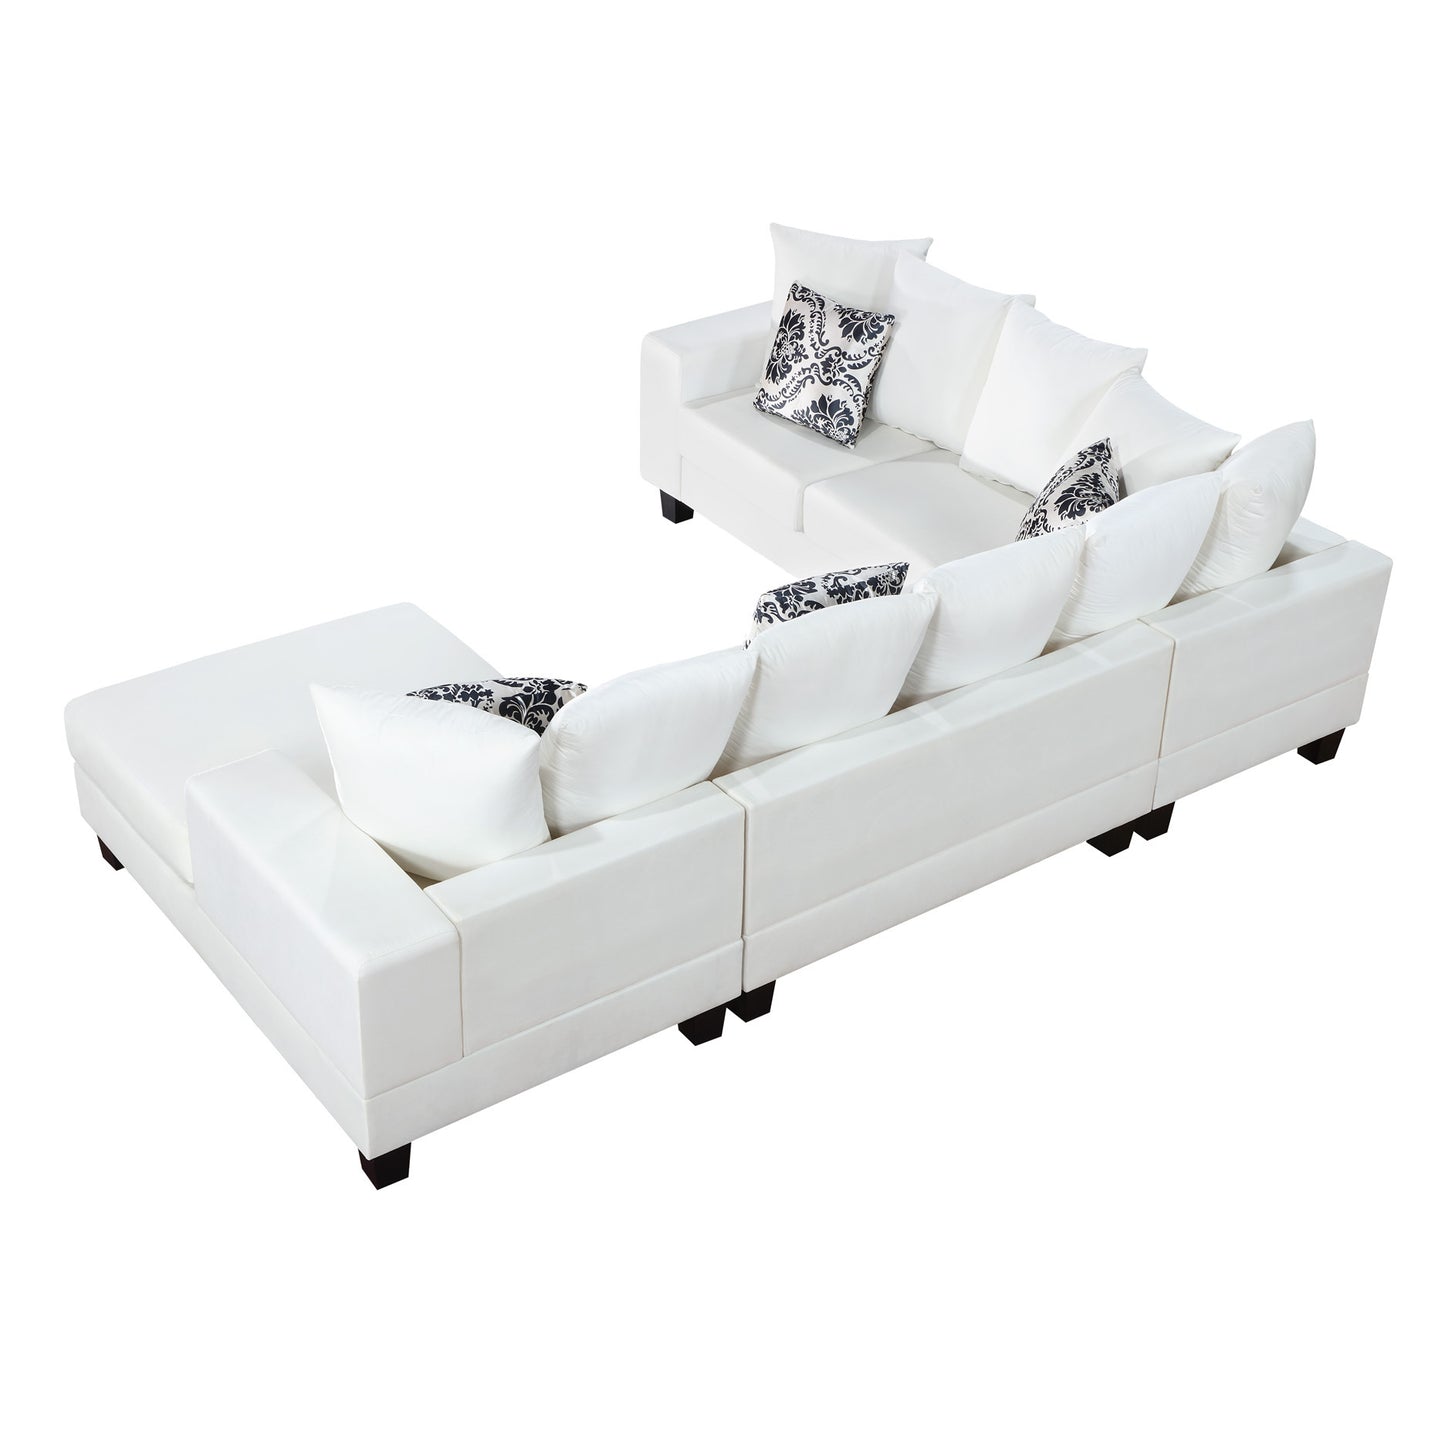 U-Shape Sectional, Corner Couch, Pillows